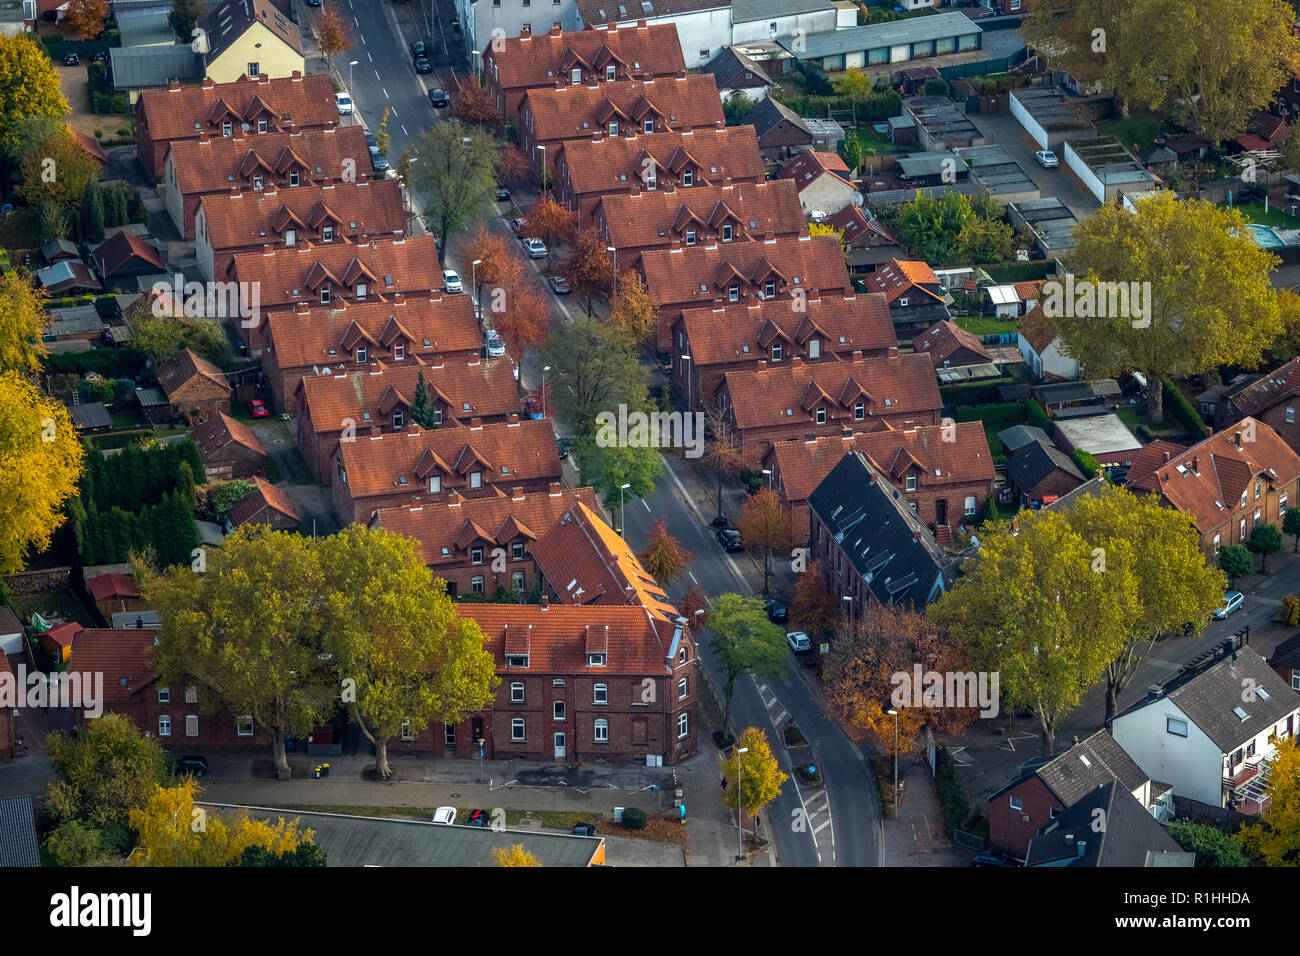 Aerial View, miners houses, red roof tiles, mining camp, uniform houses, Kirchheller road, red roof tiles, Gladbeck, Ruhr, Nordrhein-Westfalen, German Stock Photo